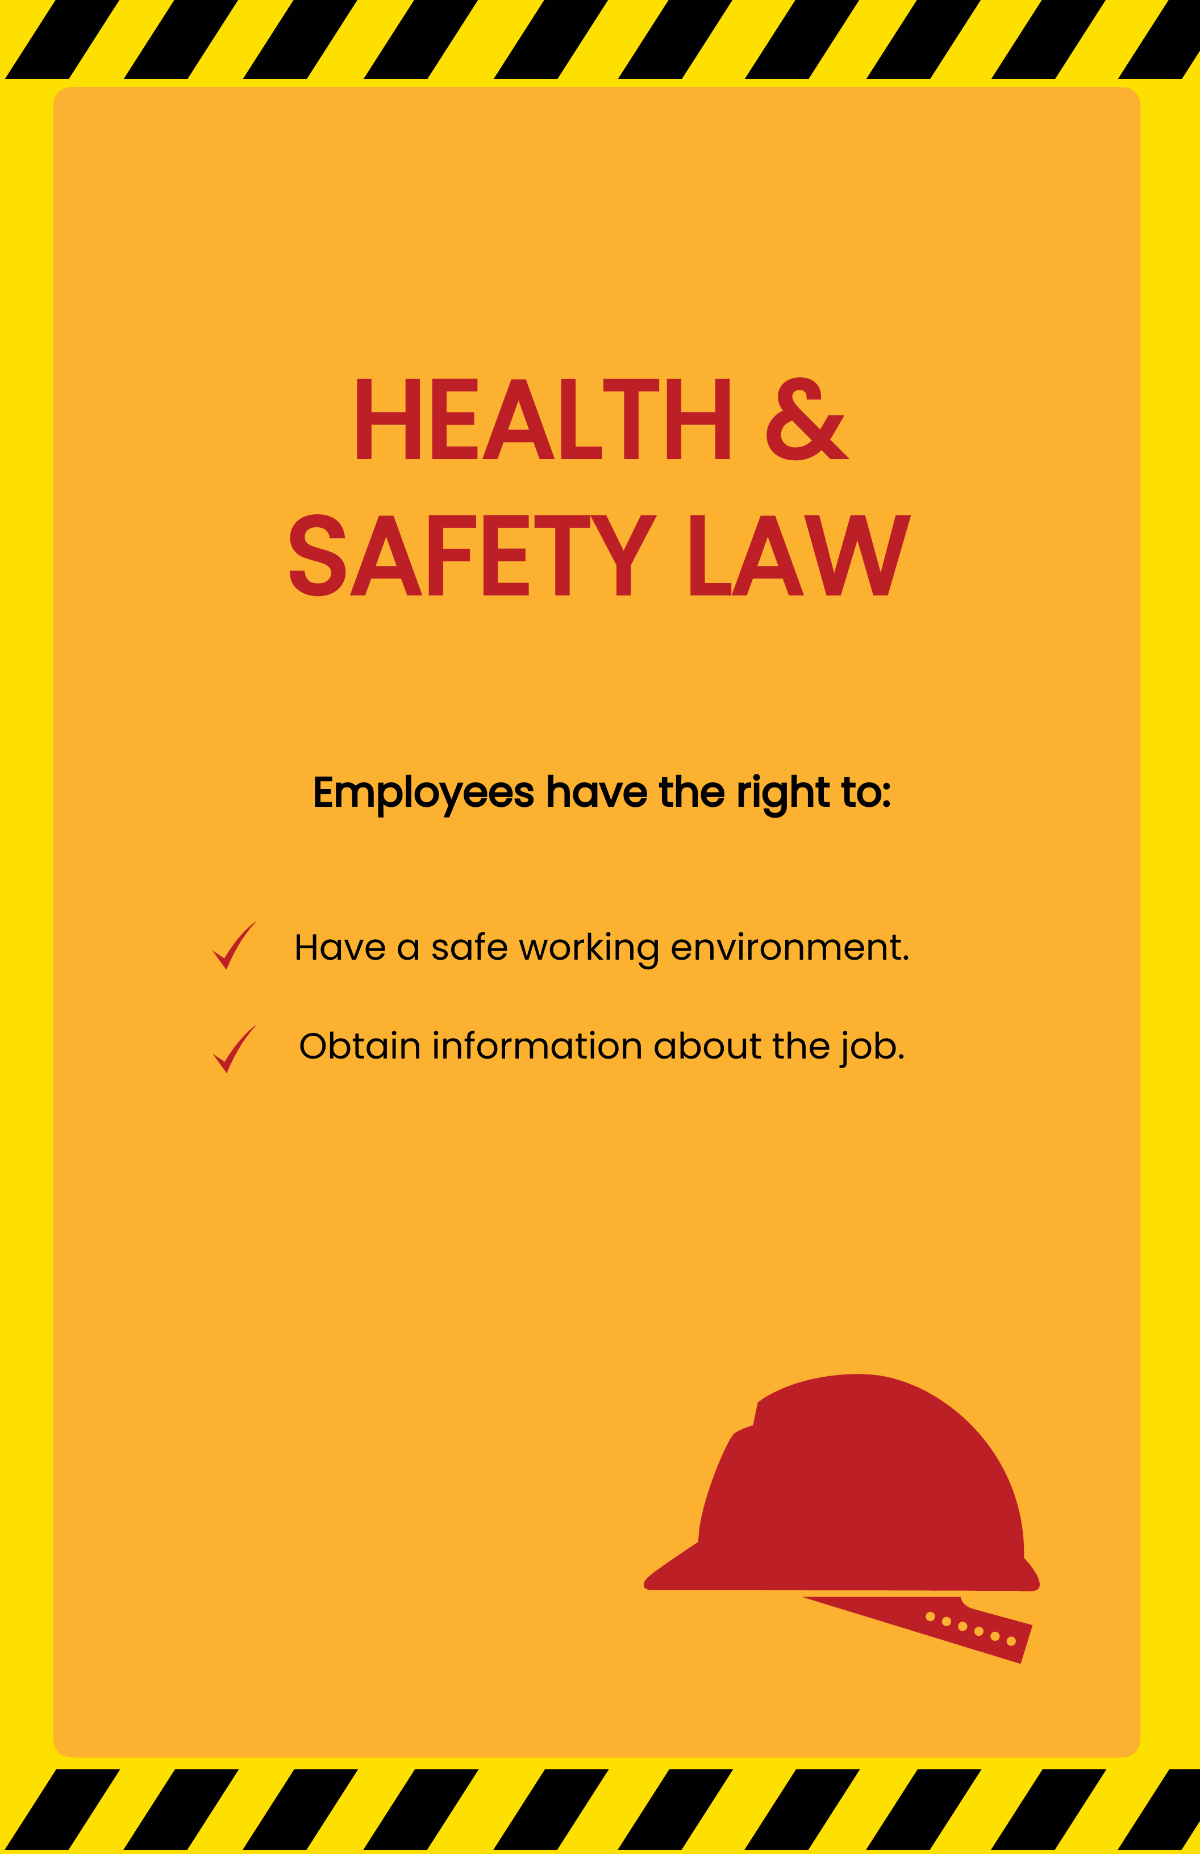 Health & Safety Law Poster Template